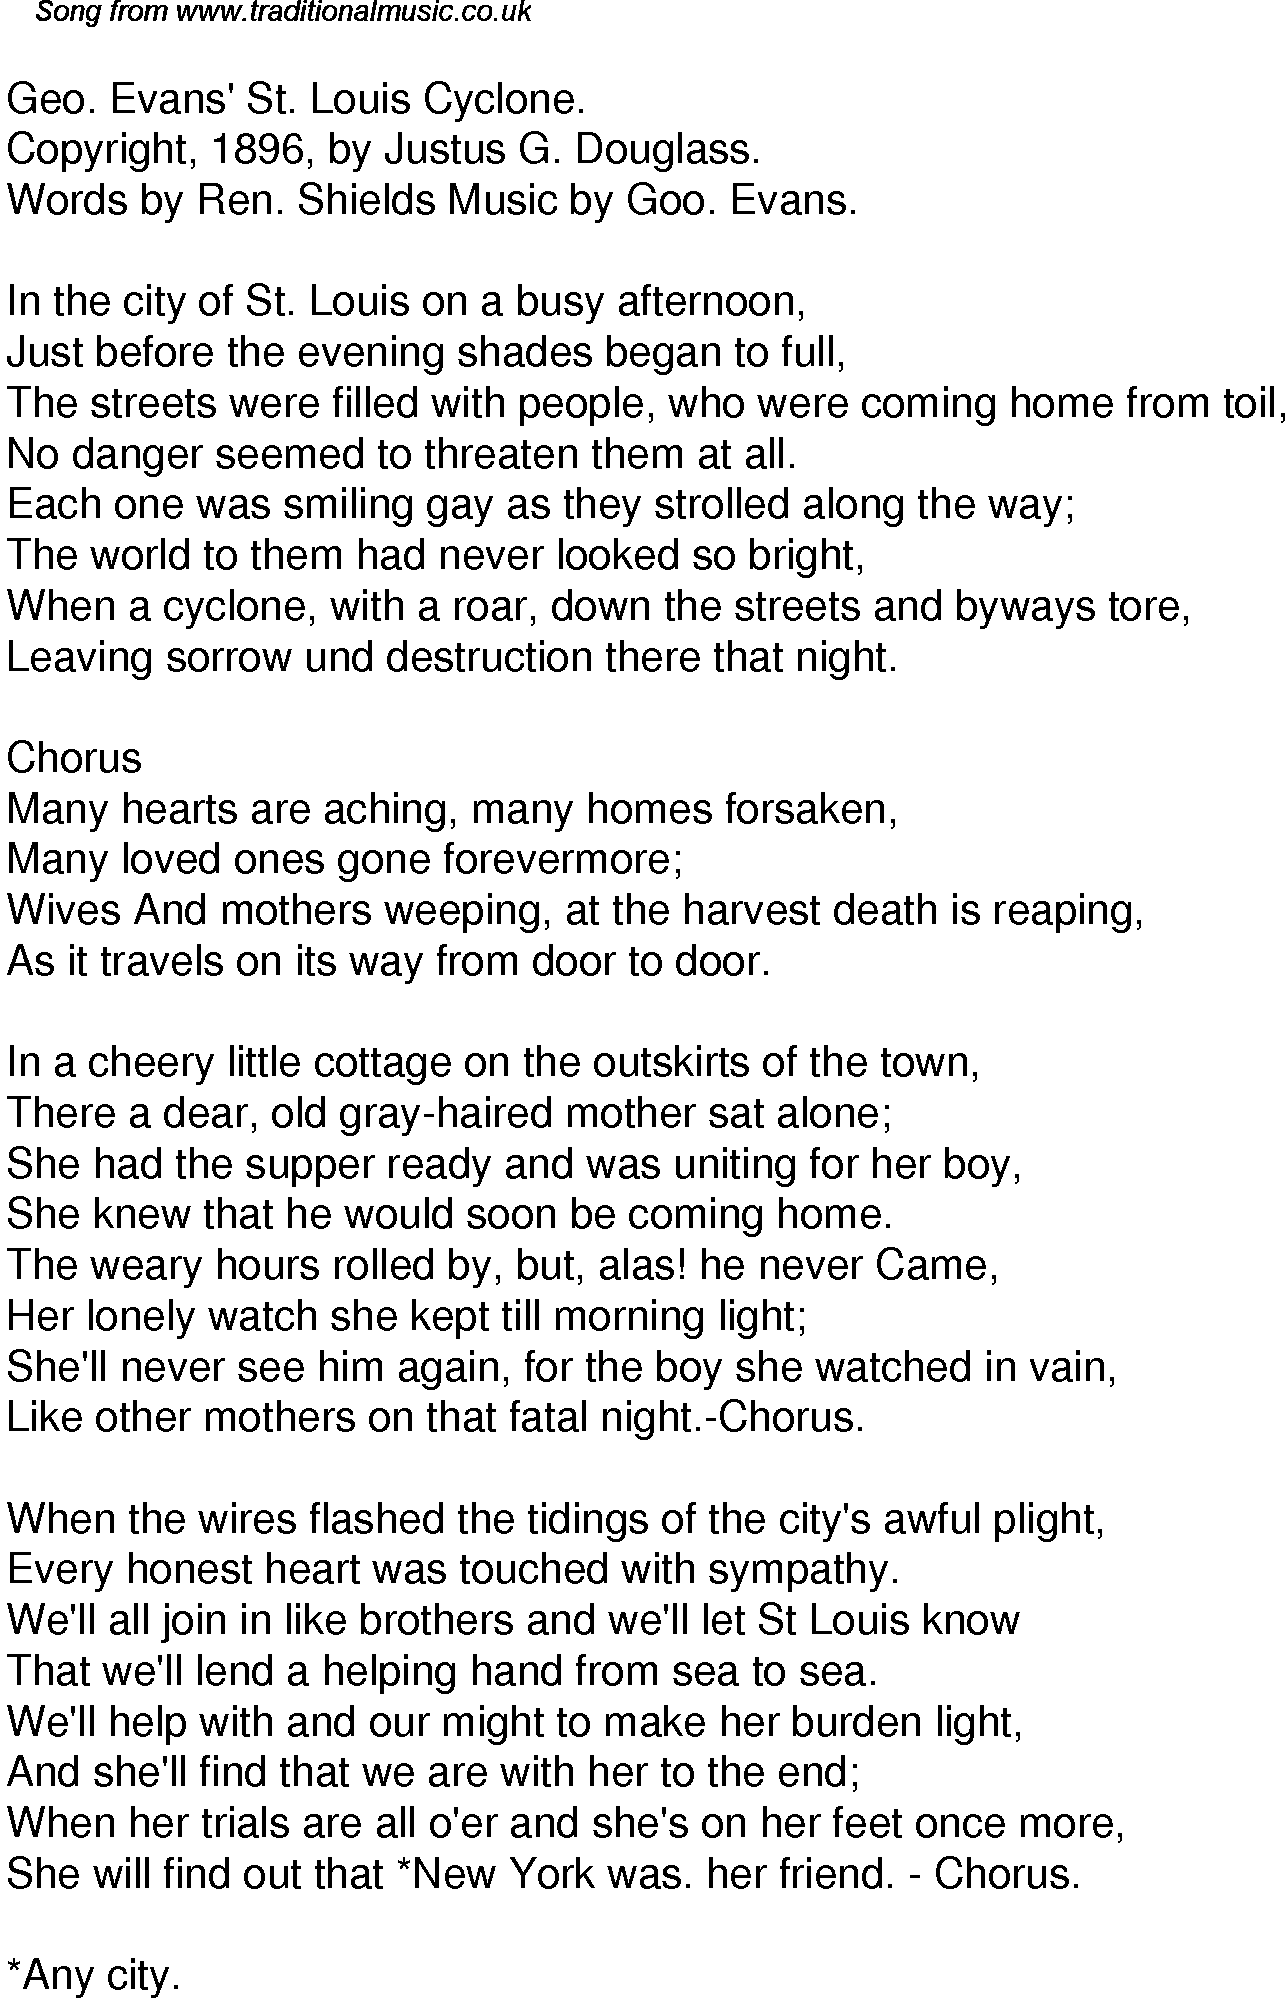 Old Time Song Lyrics for 52 Geo Evans St Louis Cyclone